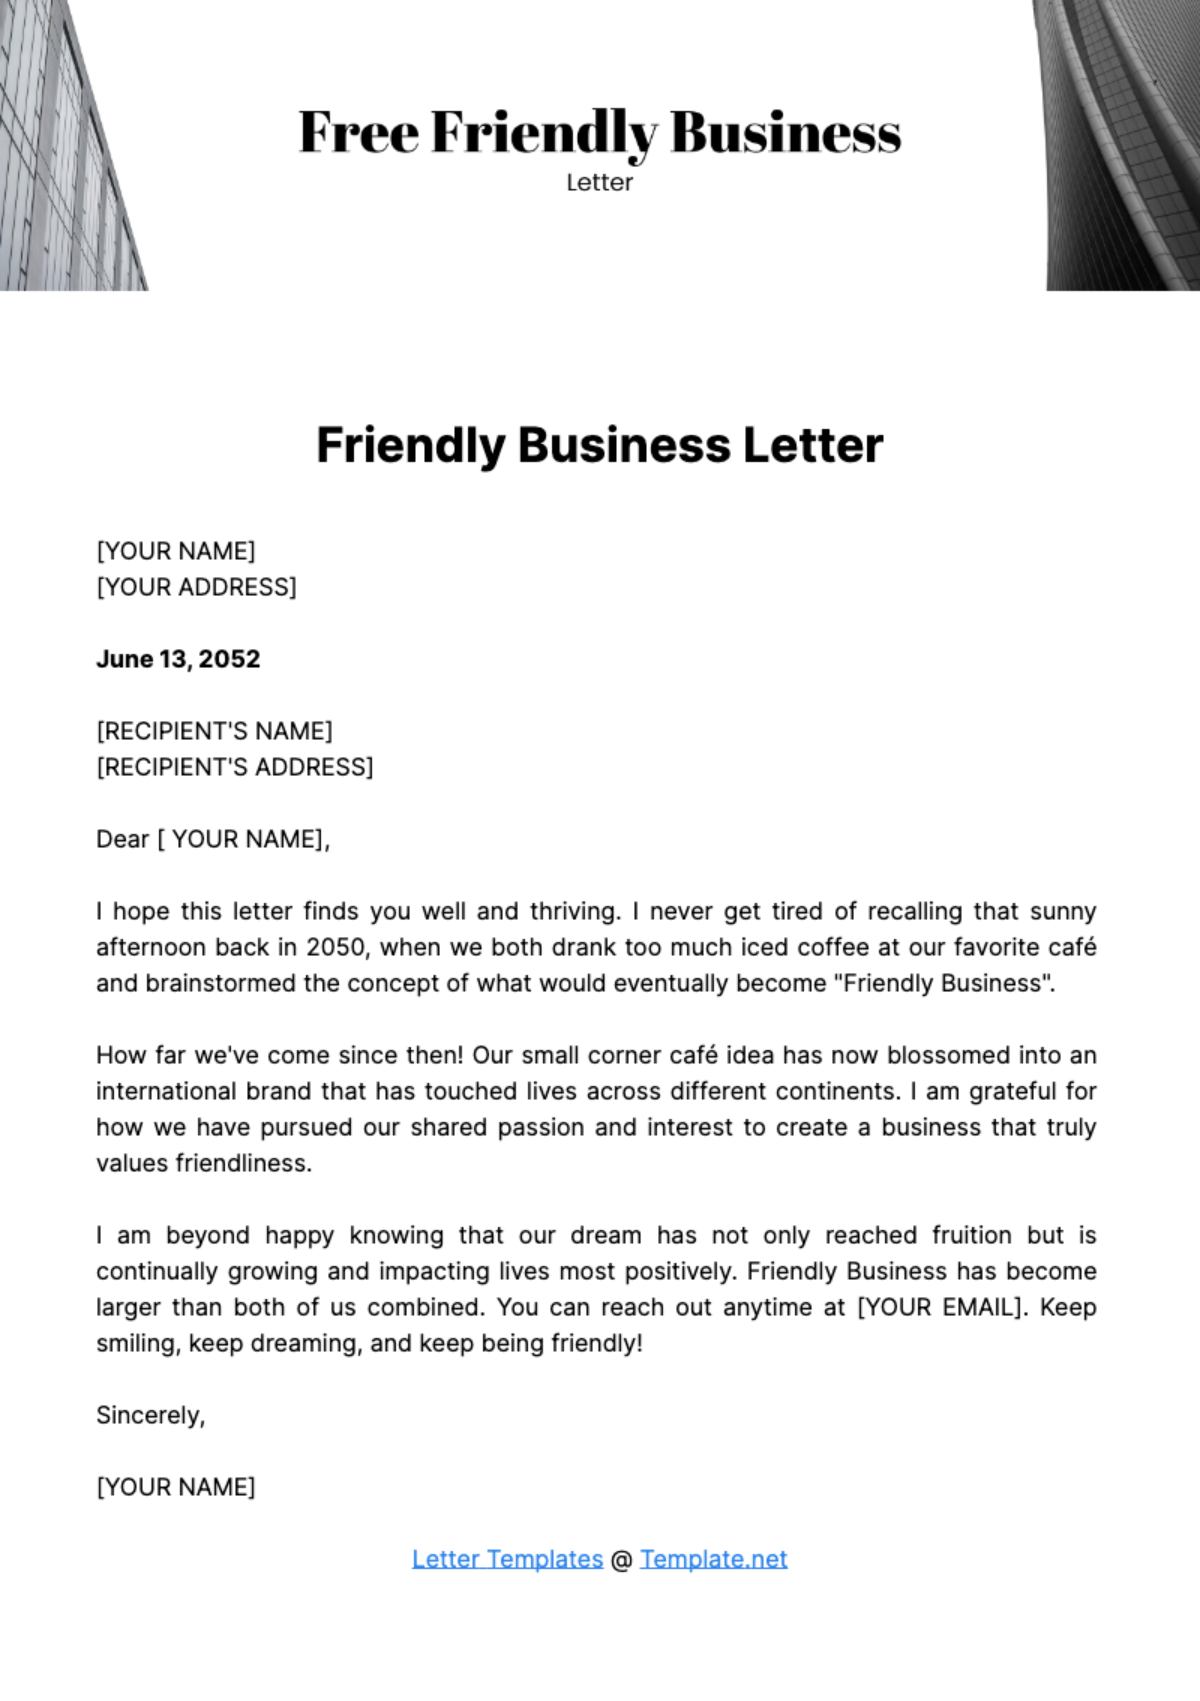 Free Friendly Business Letter Template